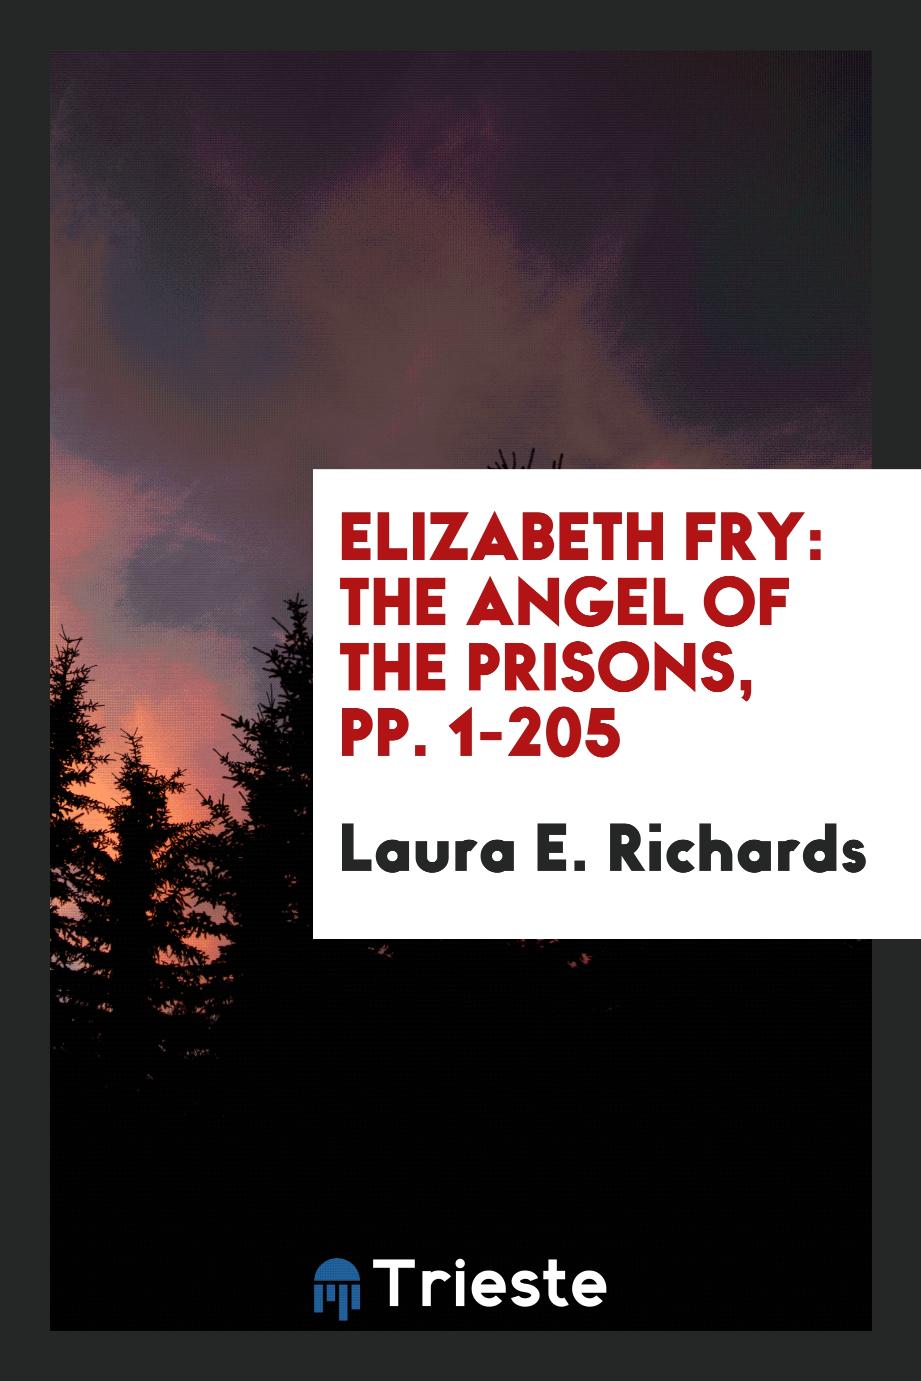 Elizabeth Fry: The Angel of the Prisons, pp. 1-205